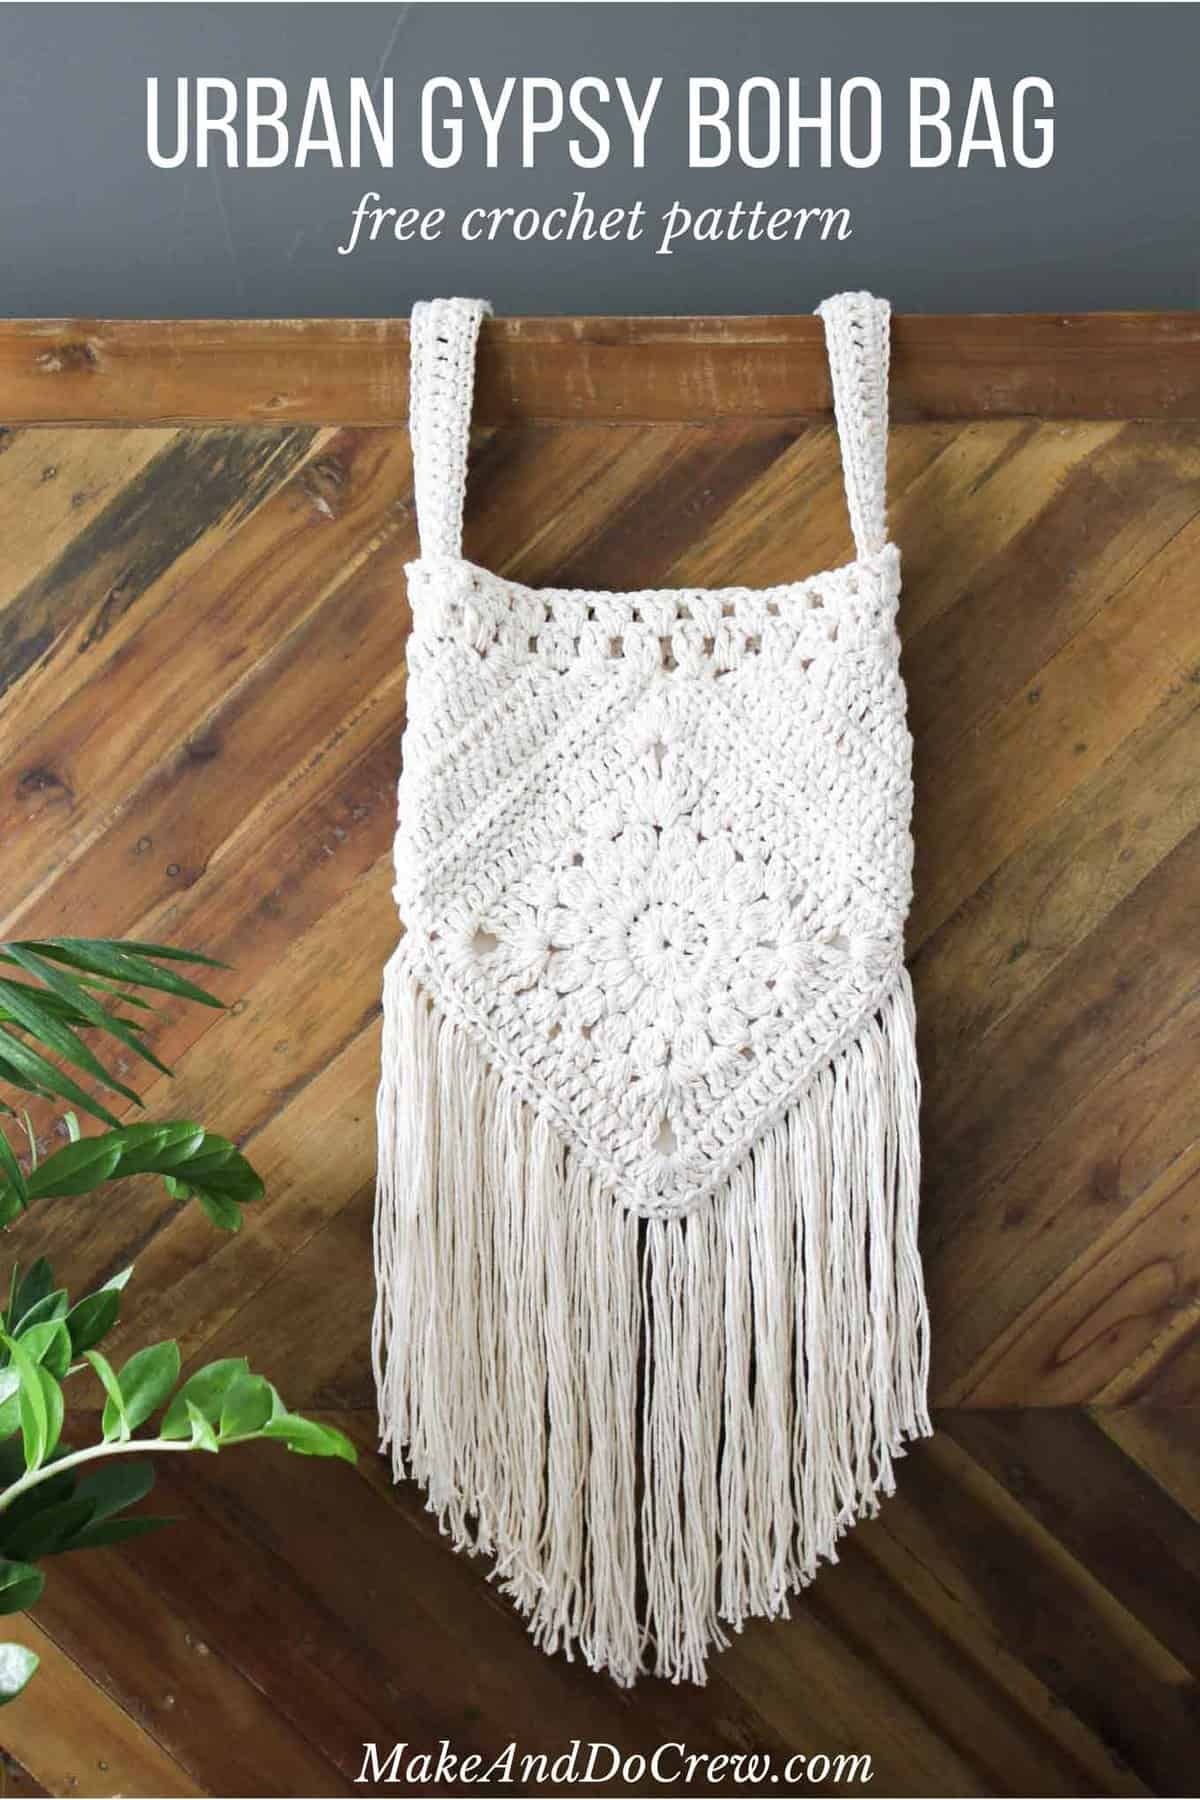 Boho love! This boho bag free crochet pattern is fun to put together and loaded with bohemian charm. Made with Lion Brand Kitchen Cotton in "Vanilla." 